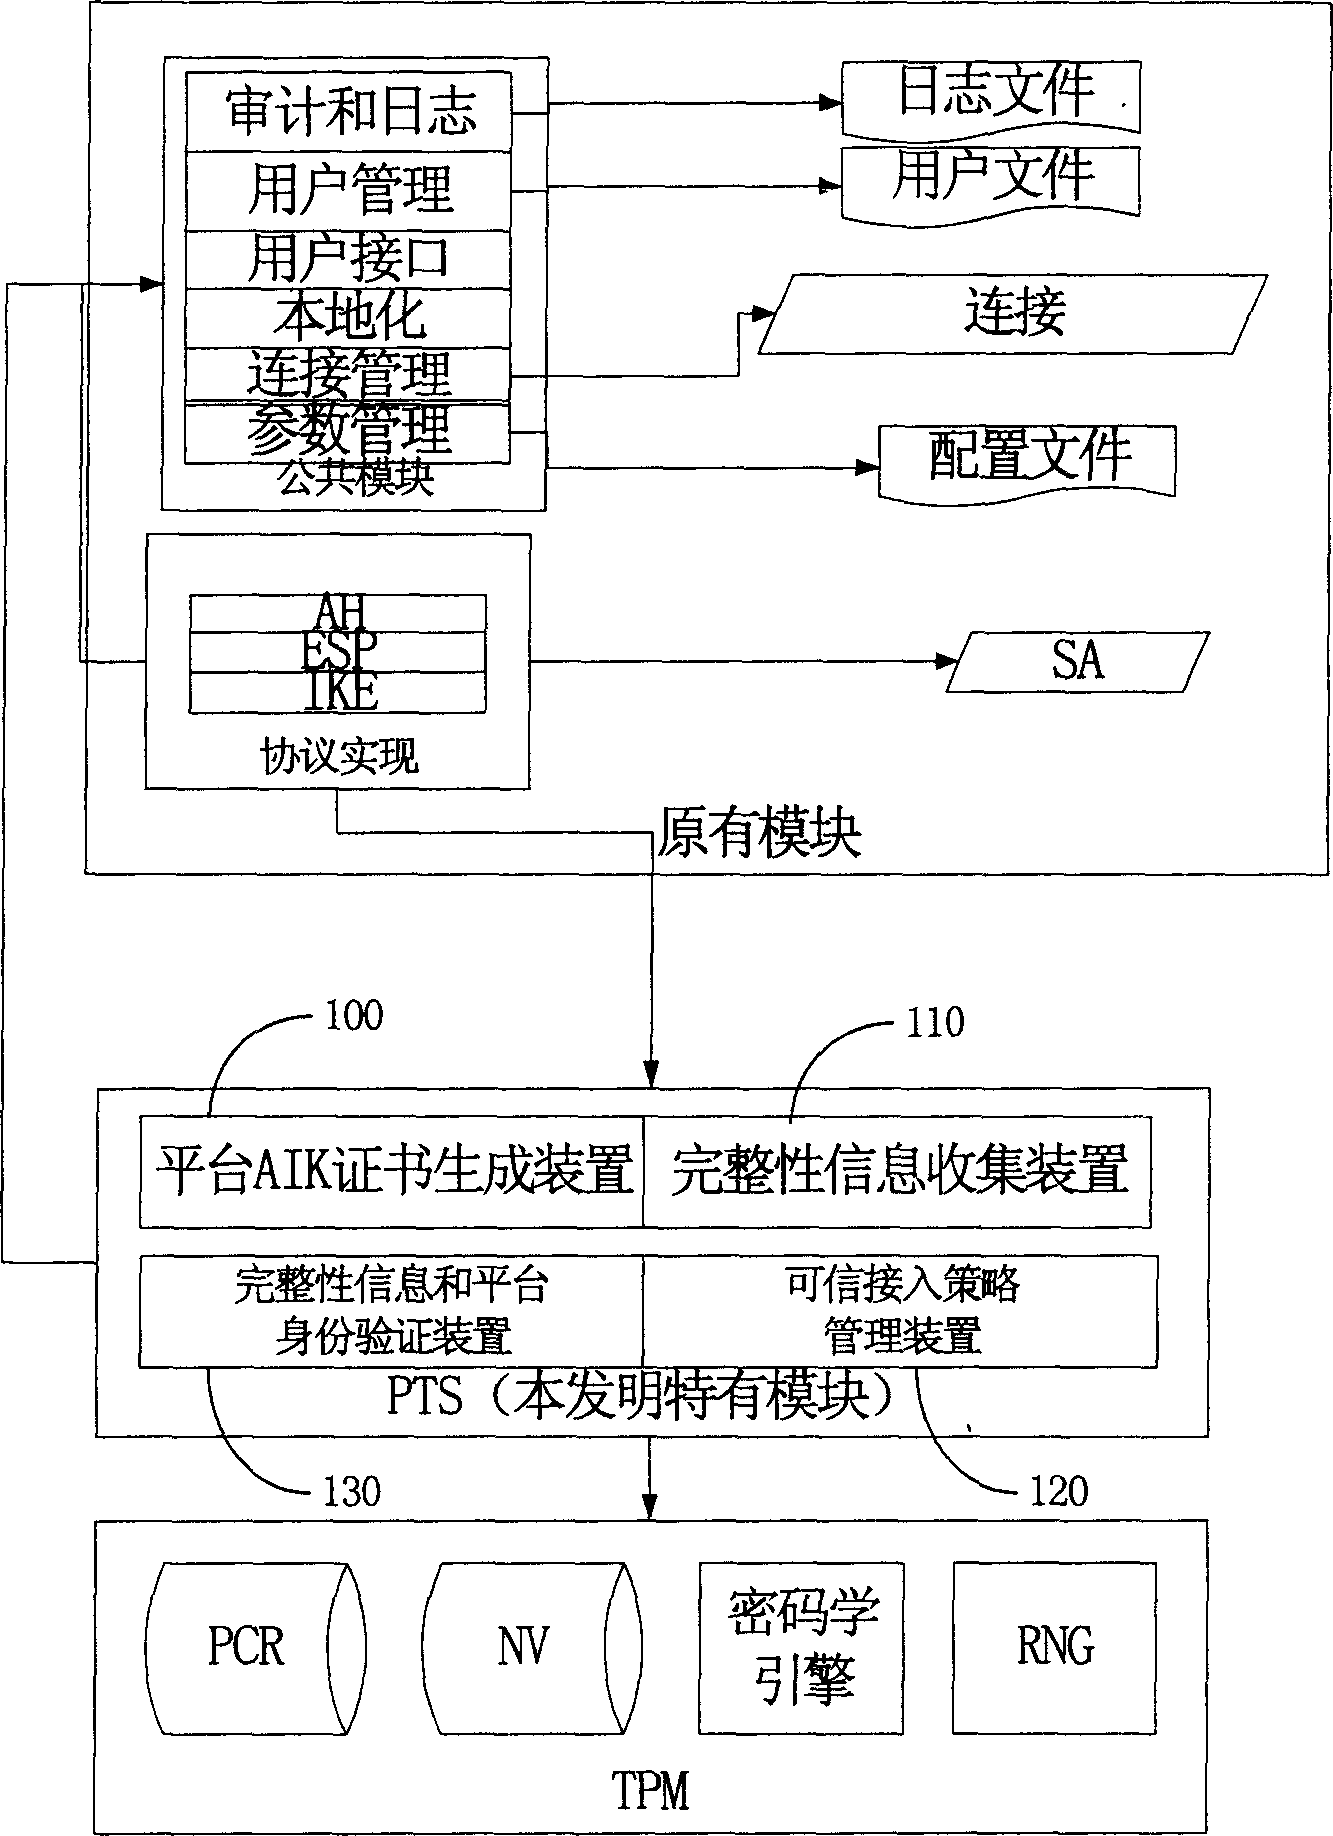 Method and system for establishing credible virtual special network connection